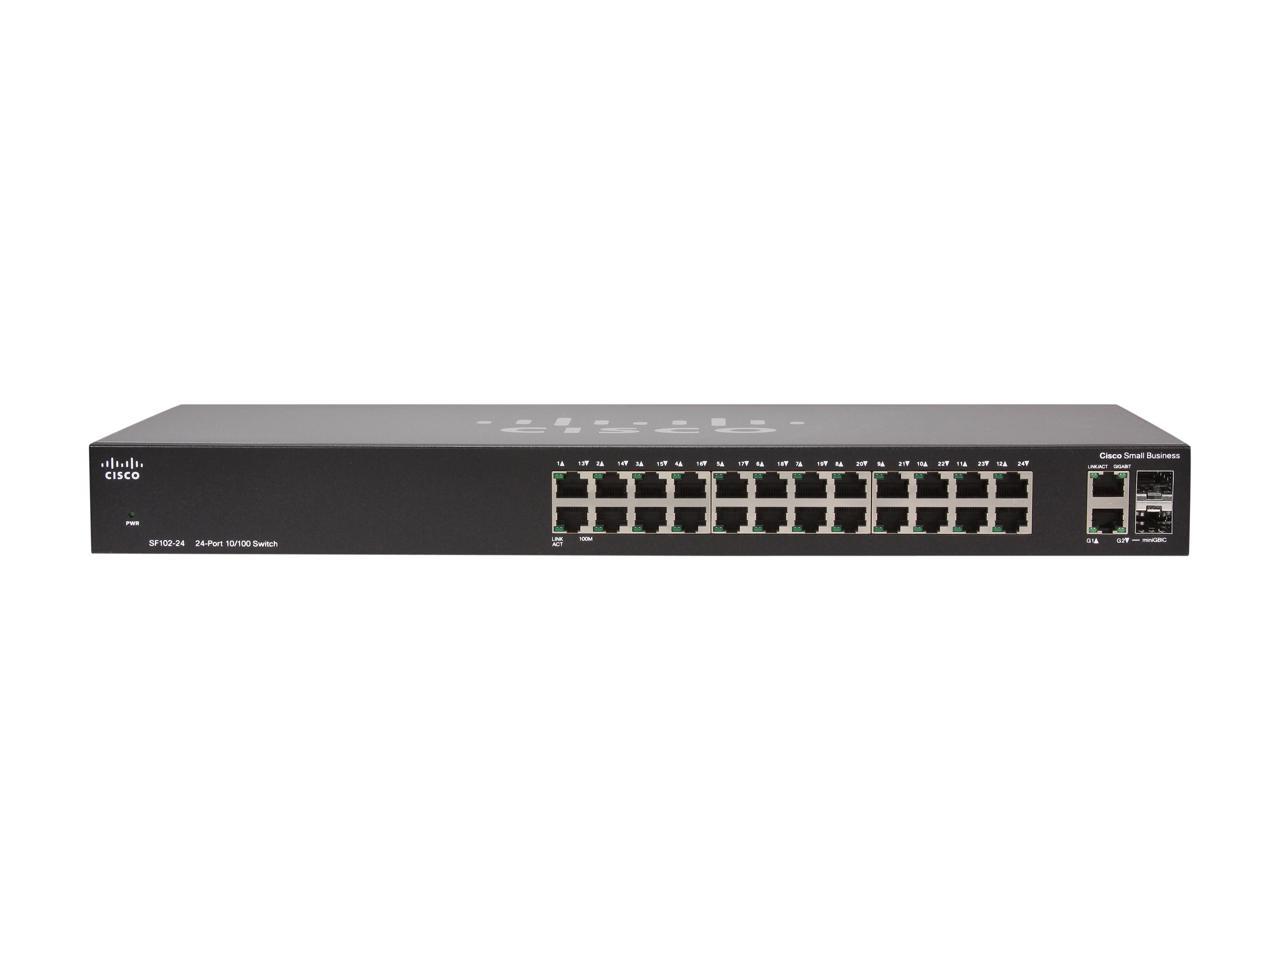 Cisco Small Business 100 Series SF102-24-NA Unmanaged 24-Port Gigabit Switch